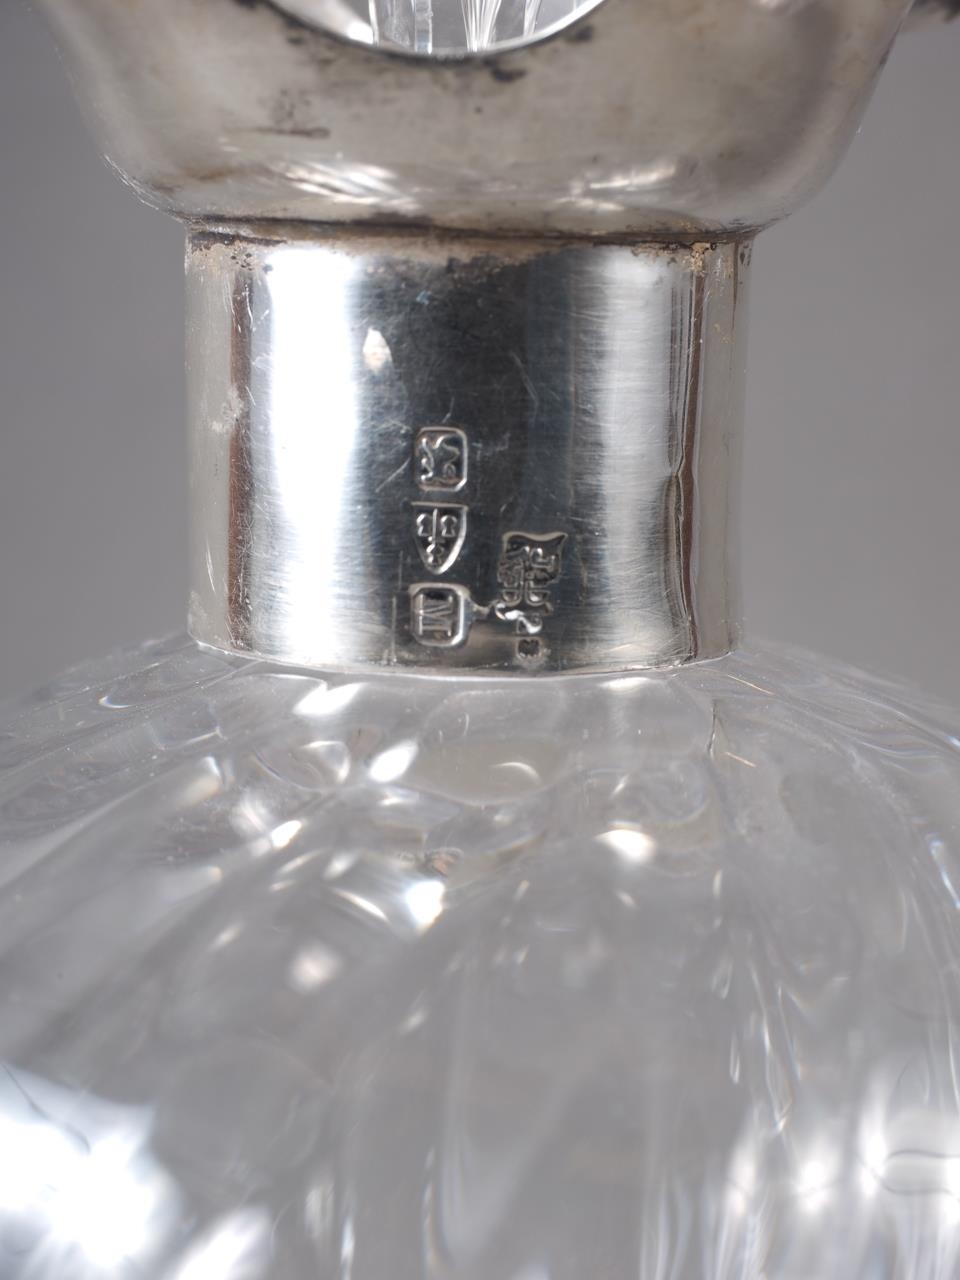 A Victorian blown glass "glug glug" decanter with silver collar, 10" high - Image 2 of 2